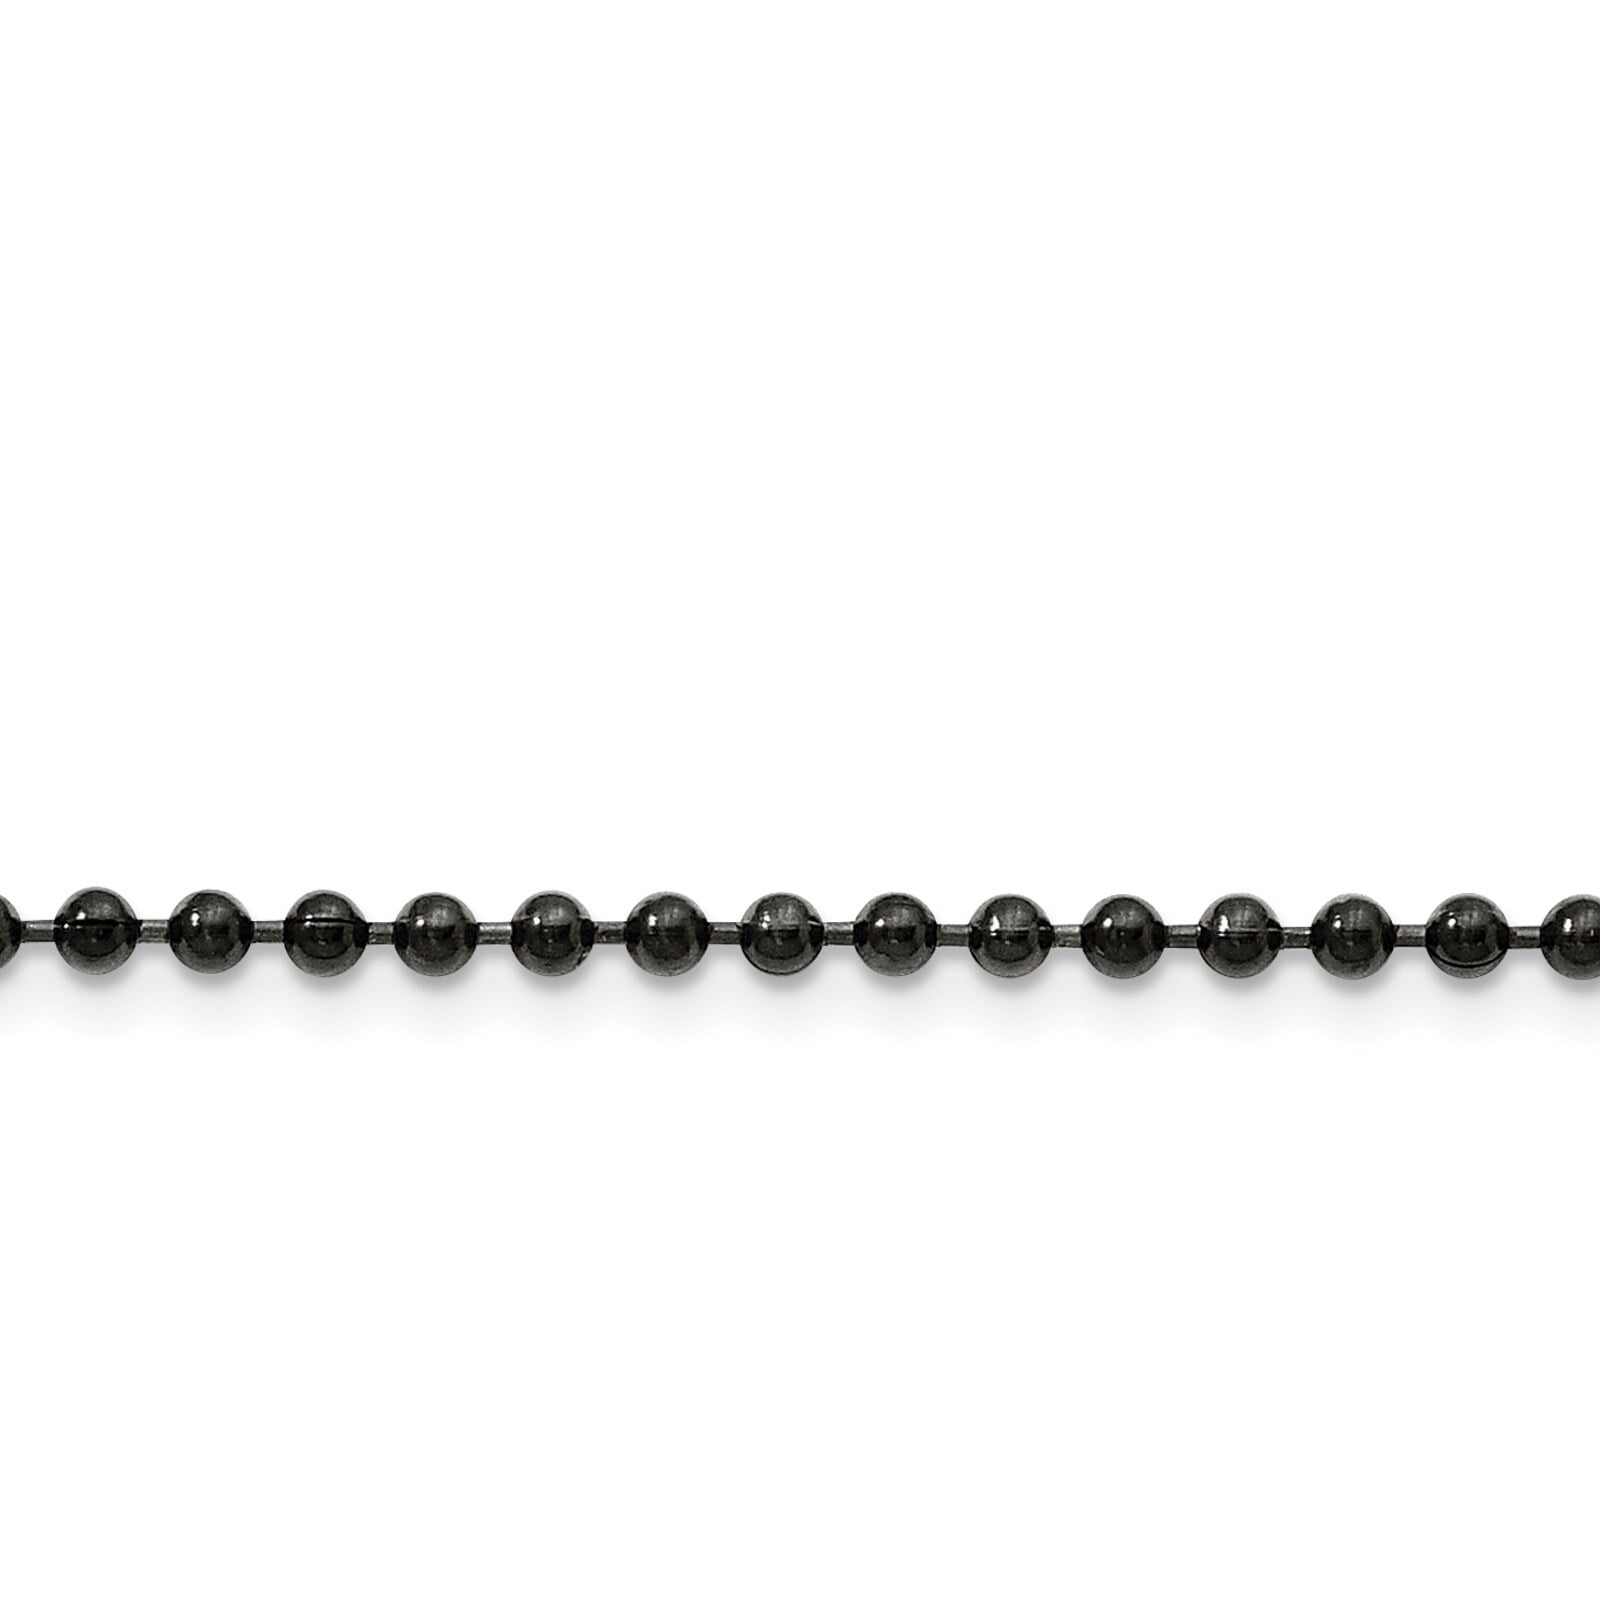 Chisel  Stainless Steel High Polished 3mm Black IP-plated Ball Chain 20 Inch